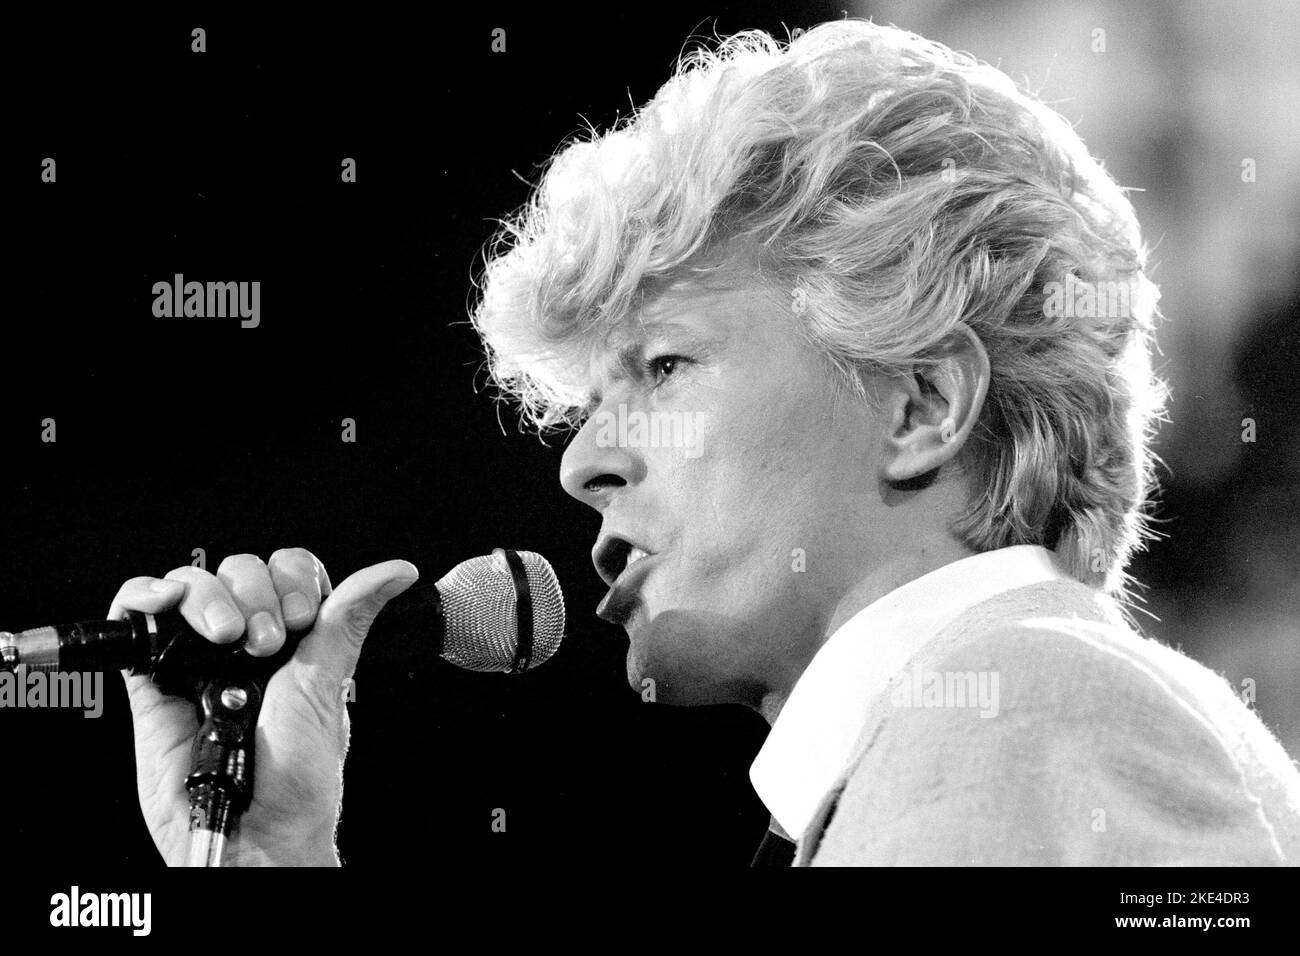 David Bowie in het Feijenoord stadion 1983. Rotterdam-Netherlands. Serious Moonlight Tour. Live on stage David Bowie.-vvbvanbree. Stock Photo